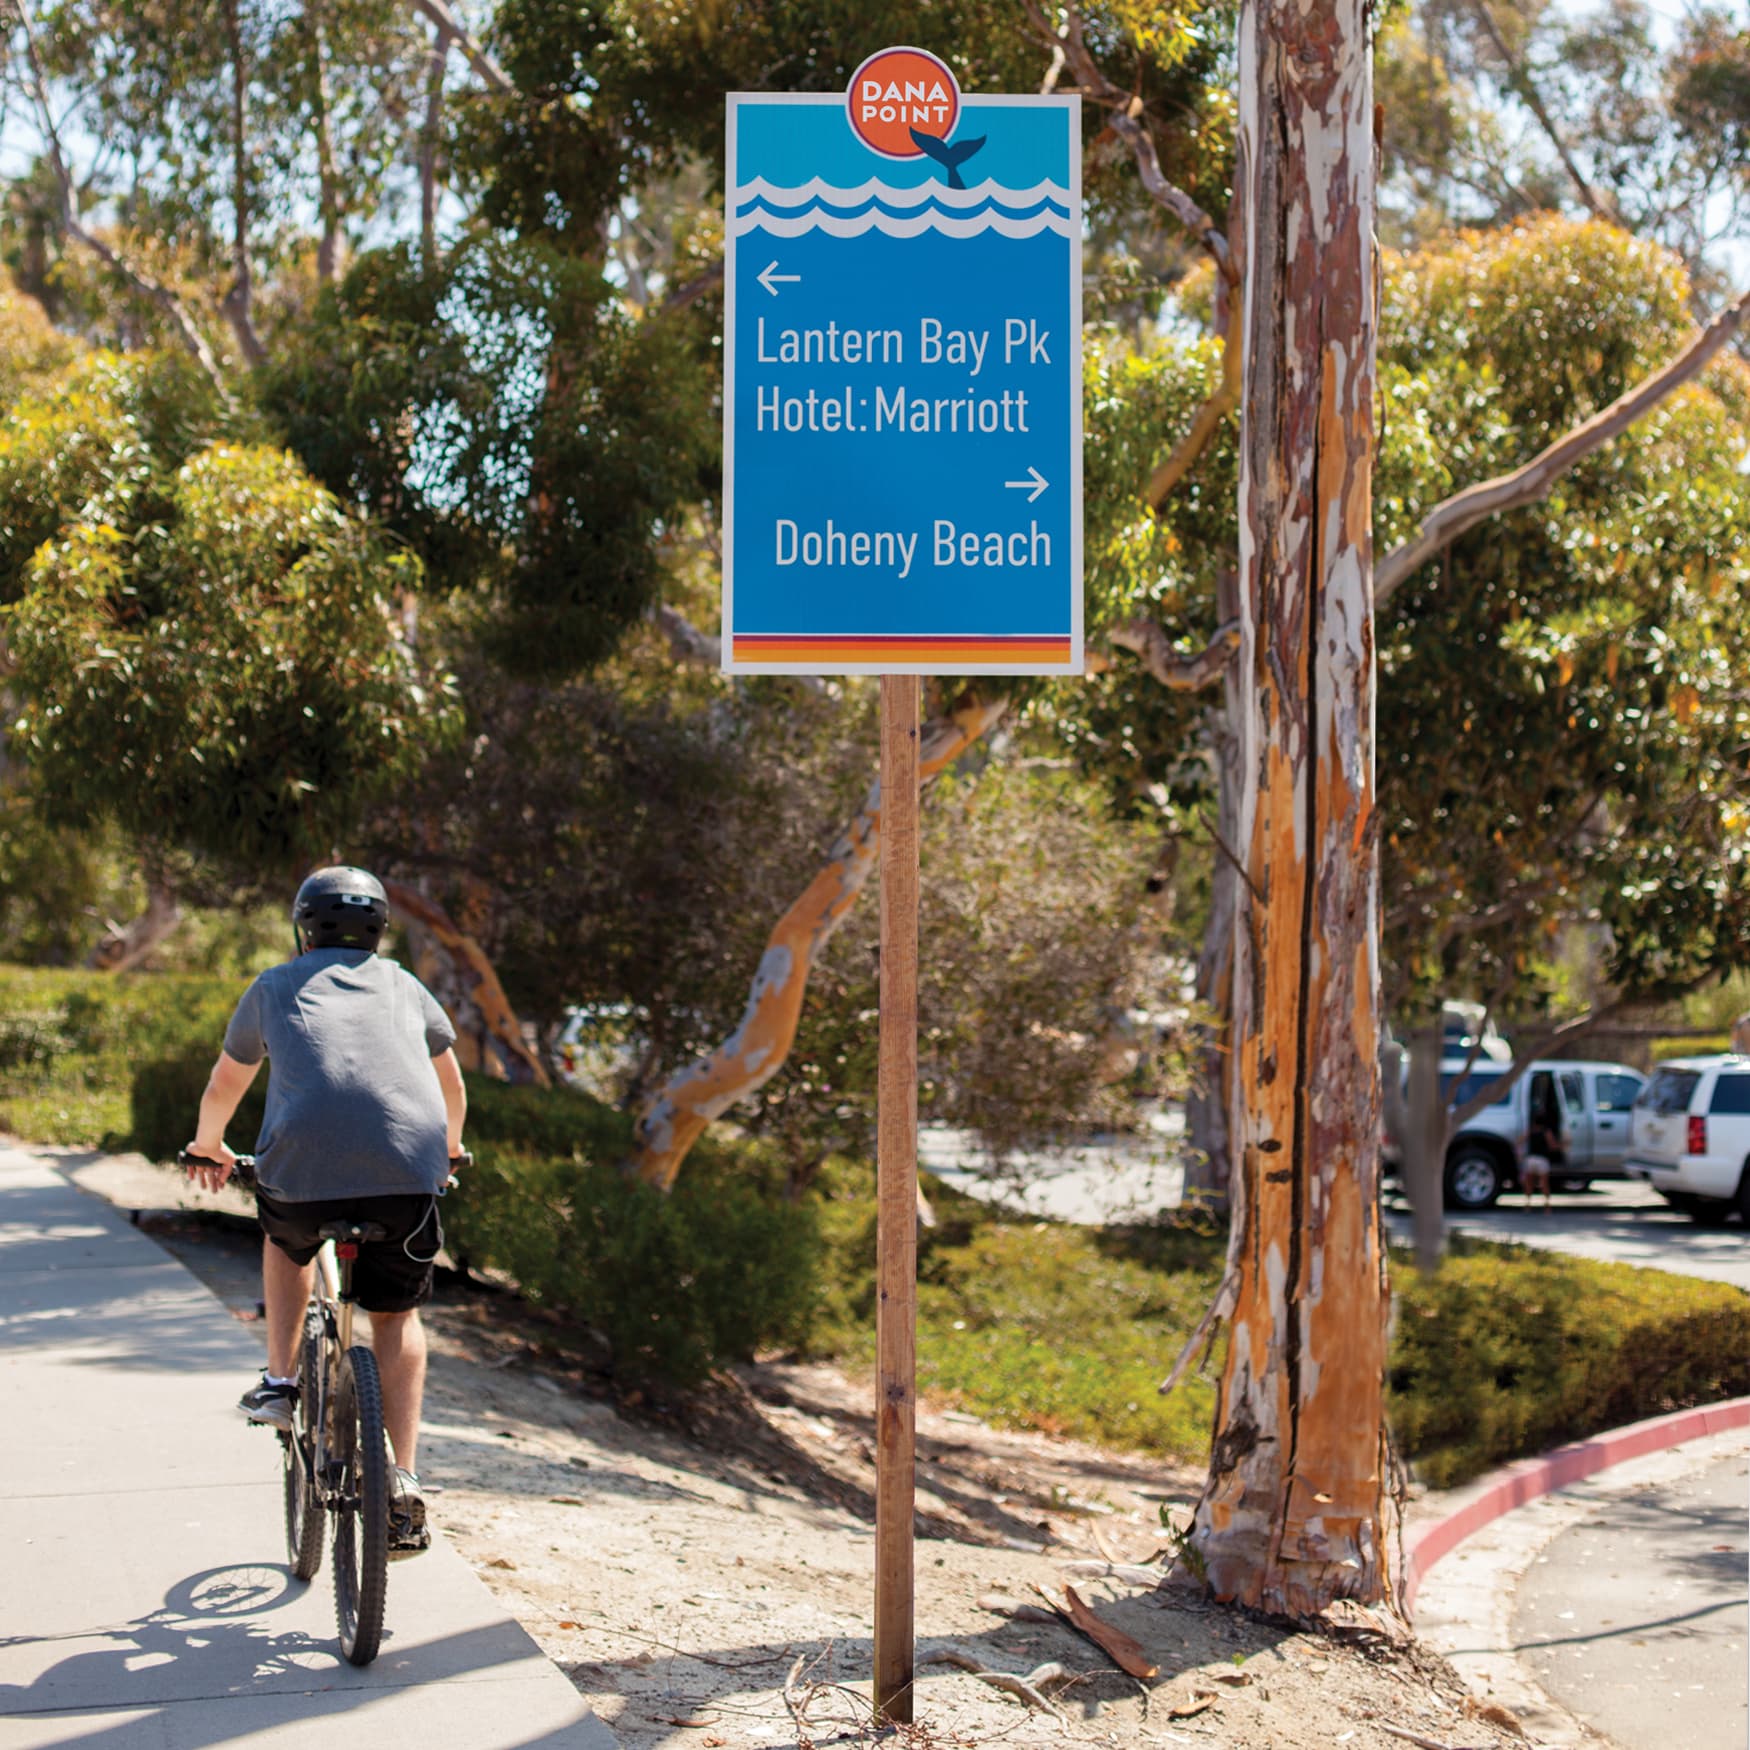 The City of Dana Point branded wayfinding system parking directional sign